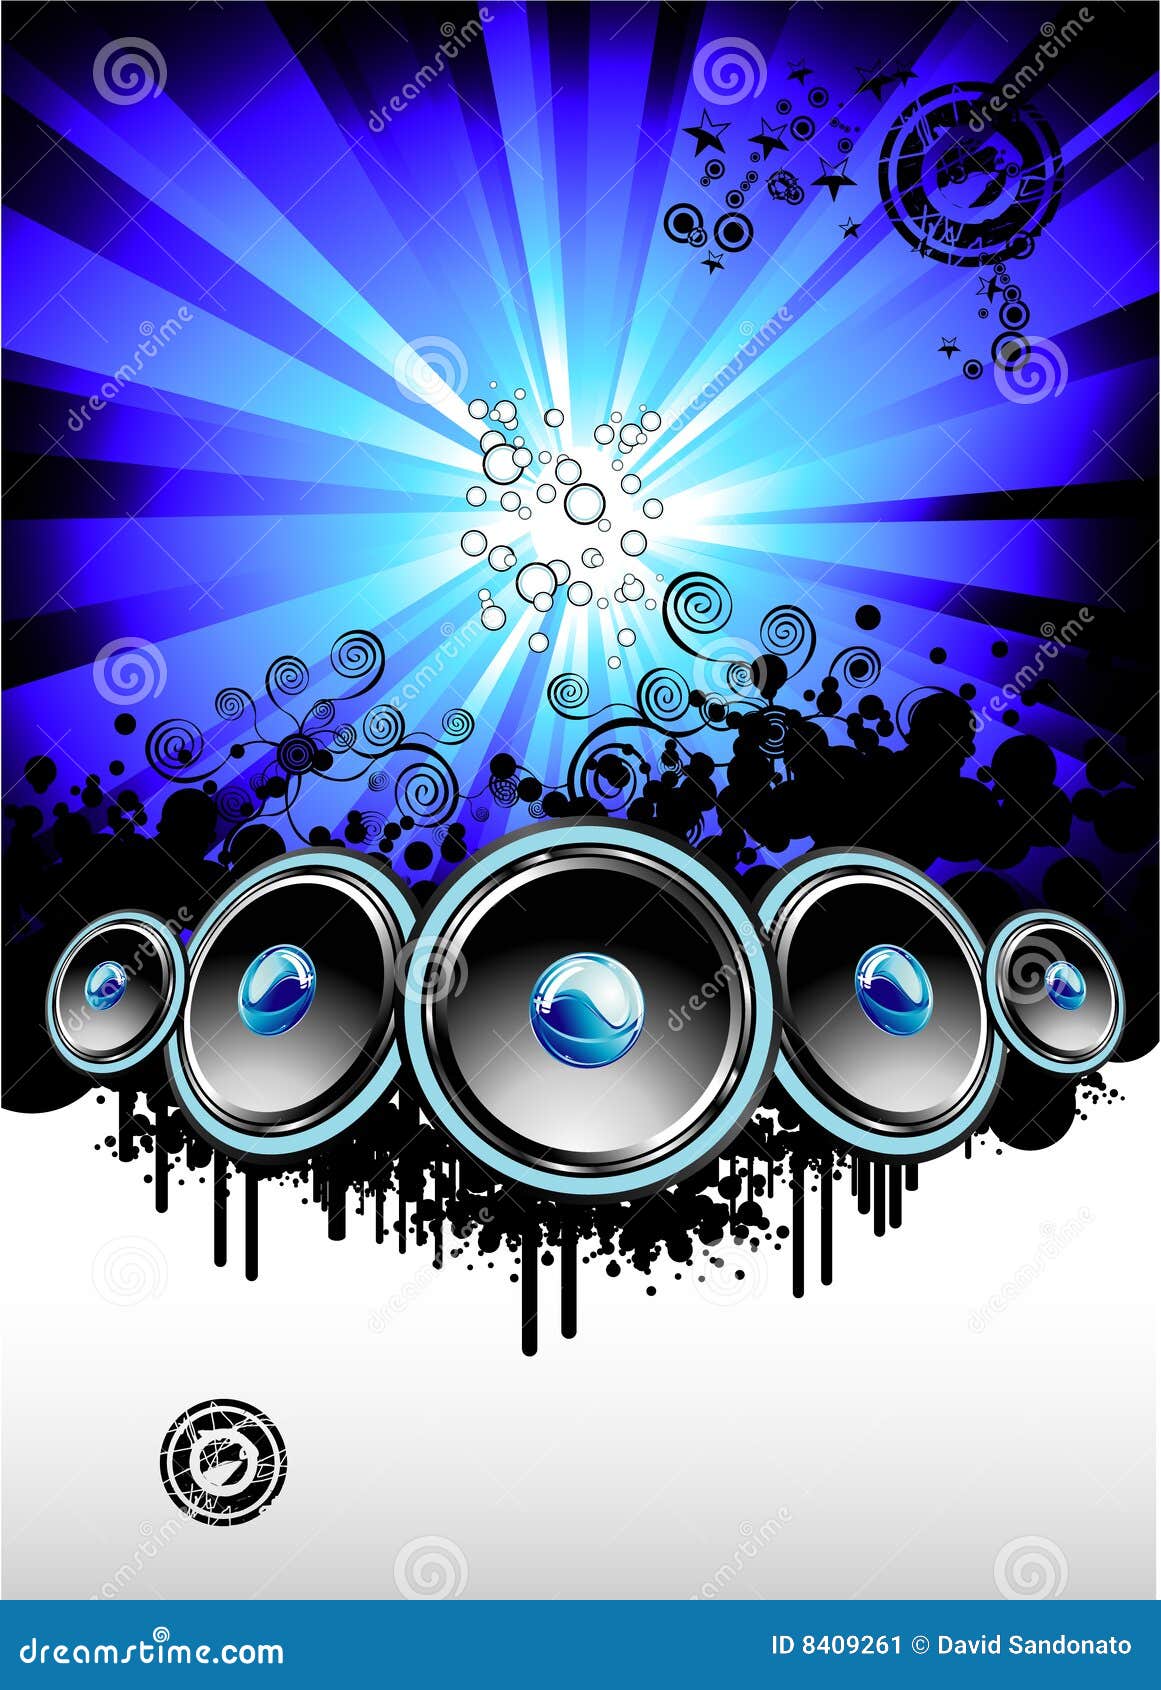 music event clipart - photo #22